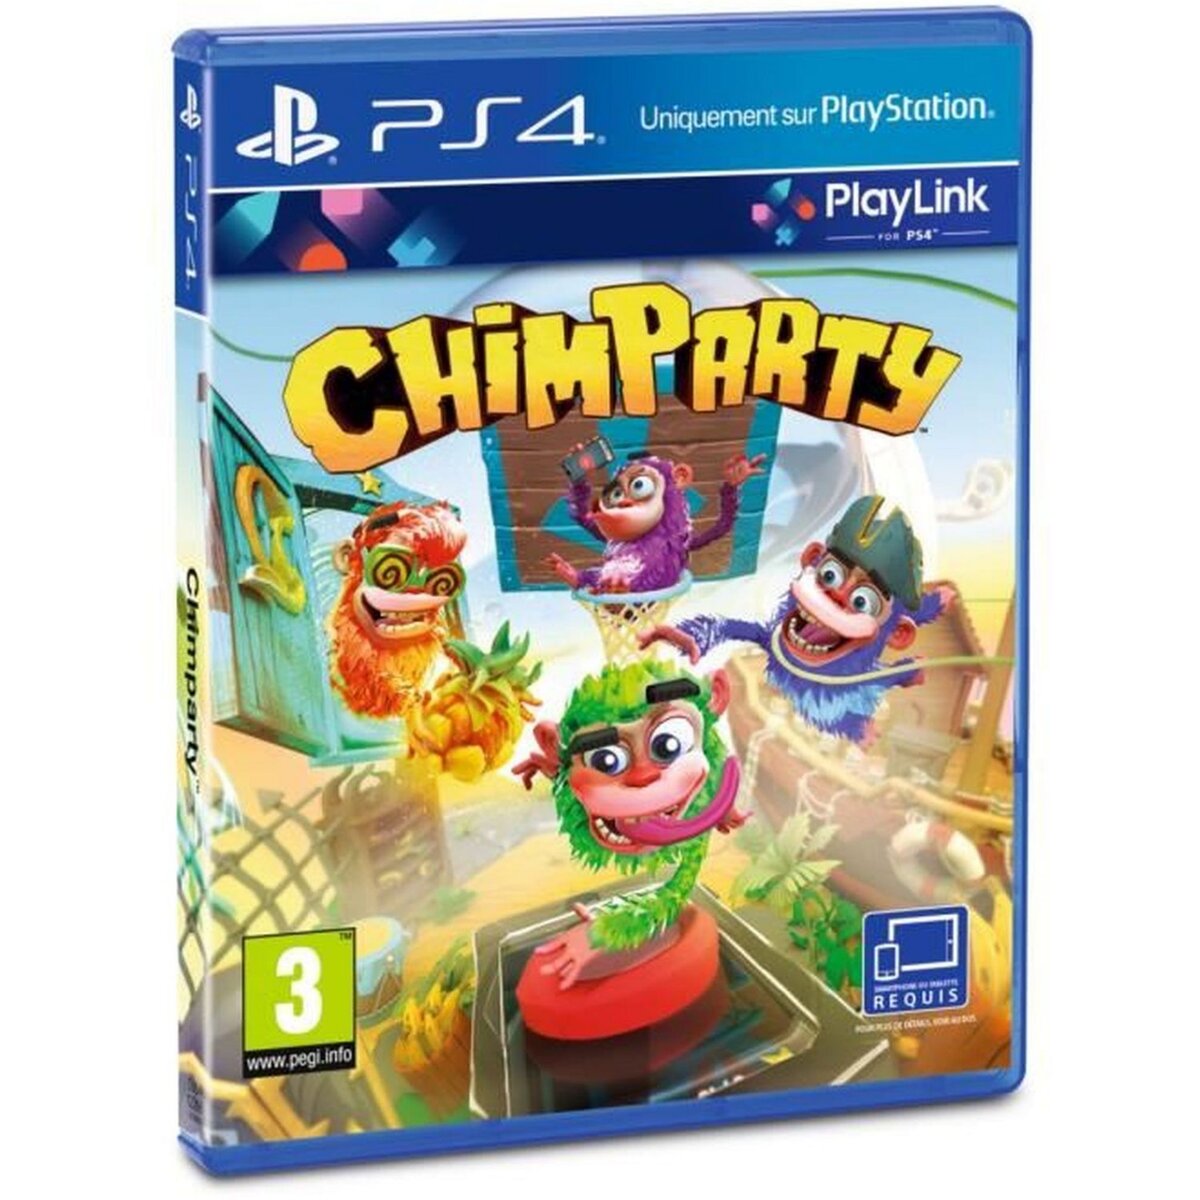 Chimparty PS4